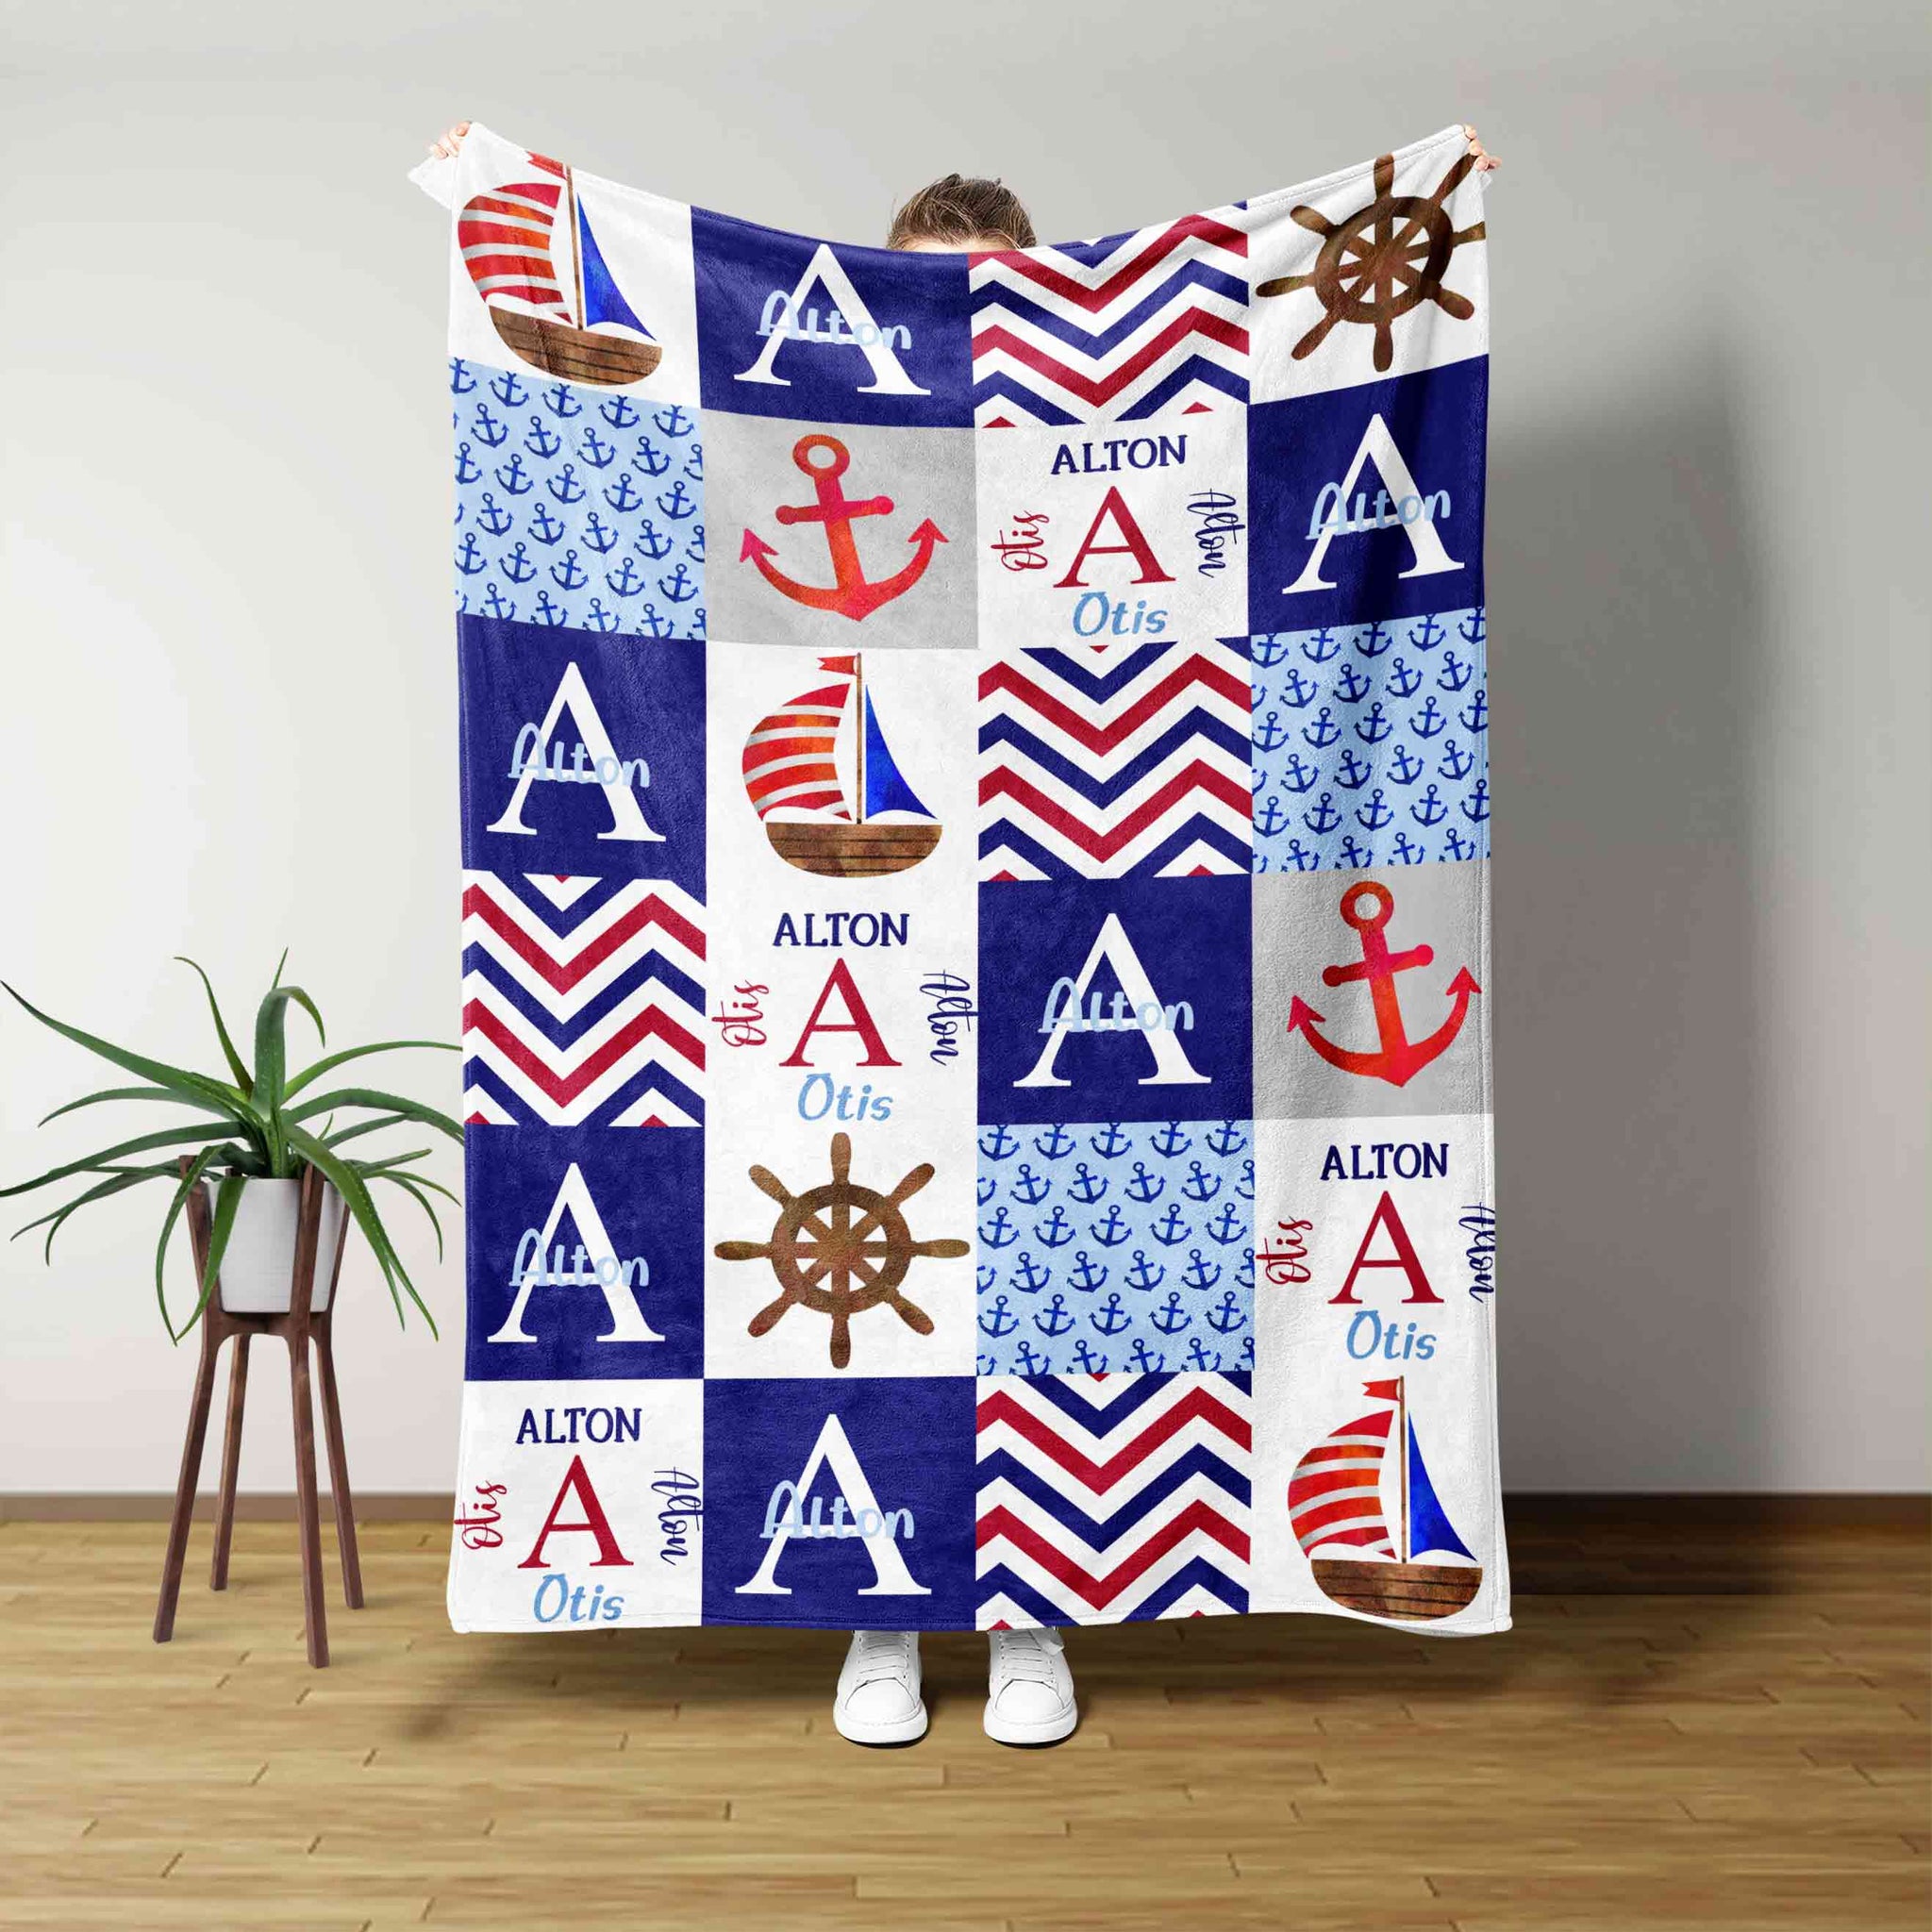 Personalized Name Blanket, Baby Blanket, Anchor Blanket, Boat Blanket, Family Blanket, Gift Blanket